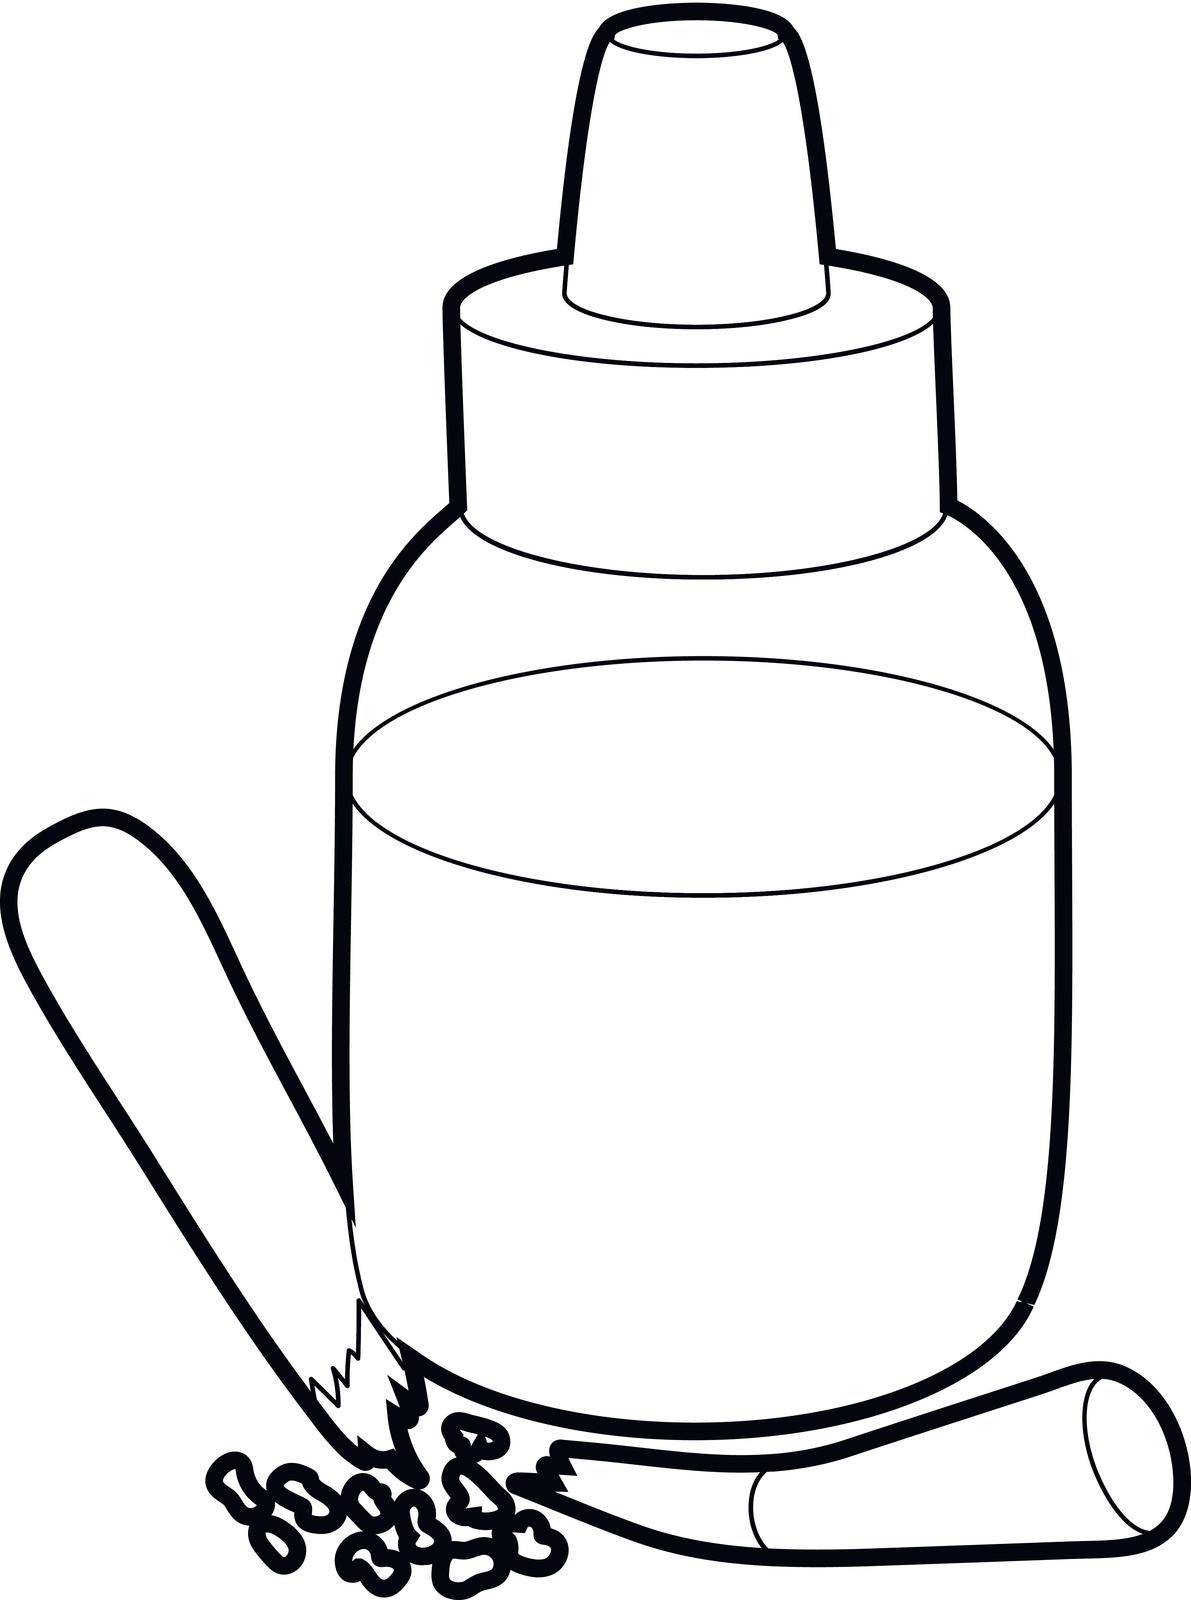 Refill bottle and cigarette icon, outline style by ylivdesign